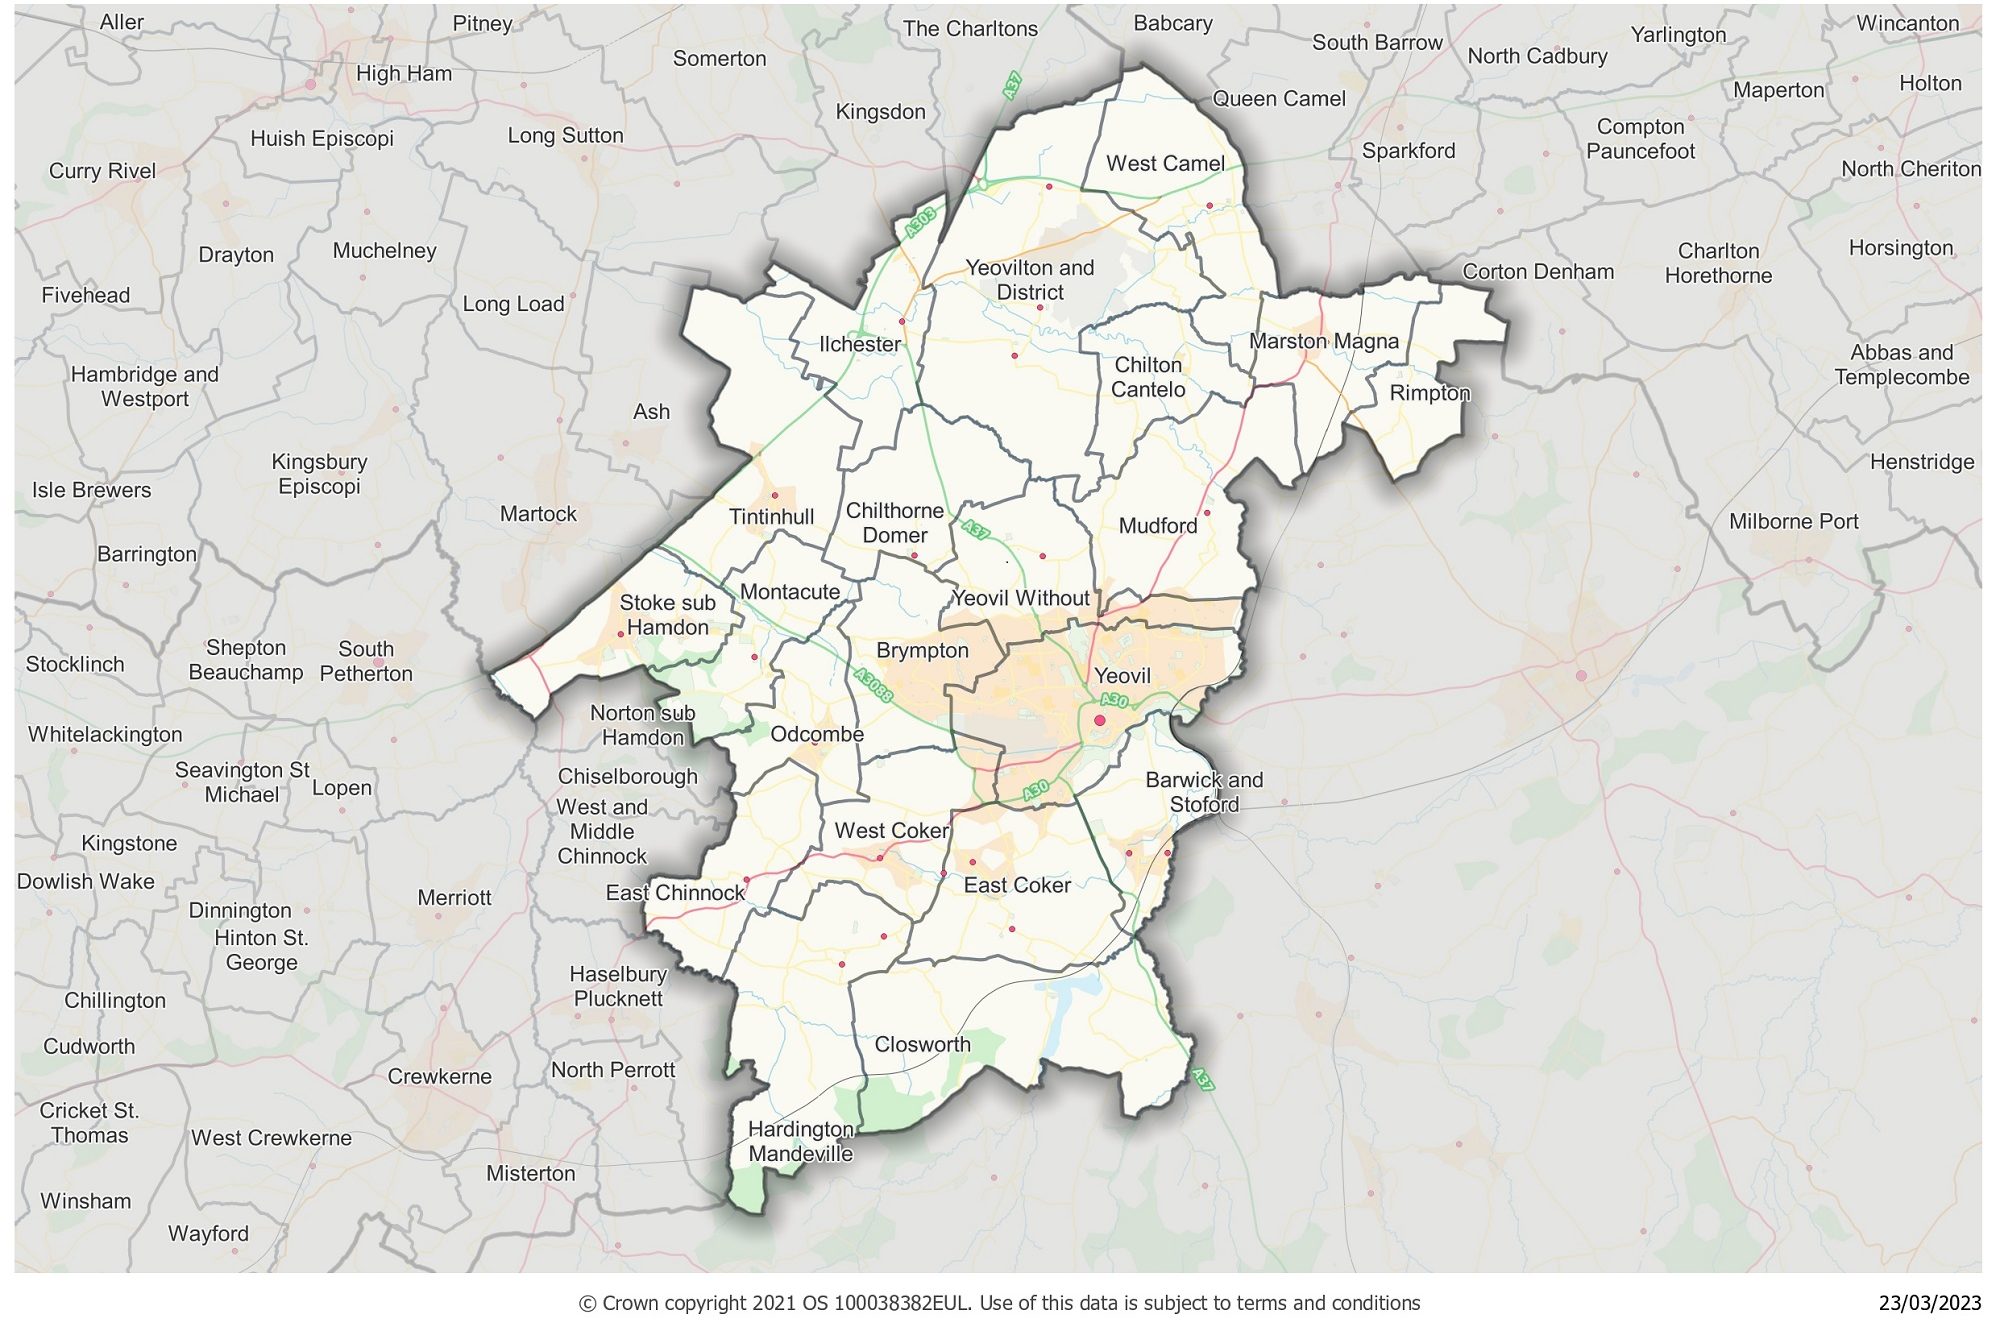 Yeovil local community network area map